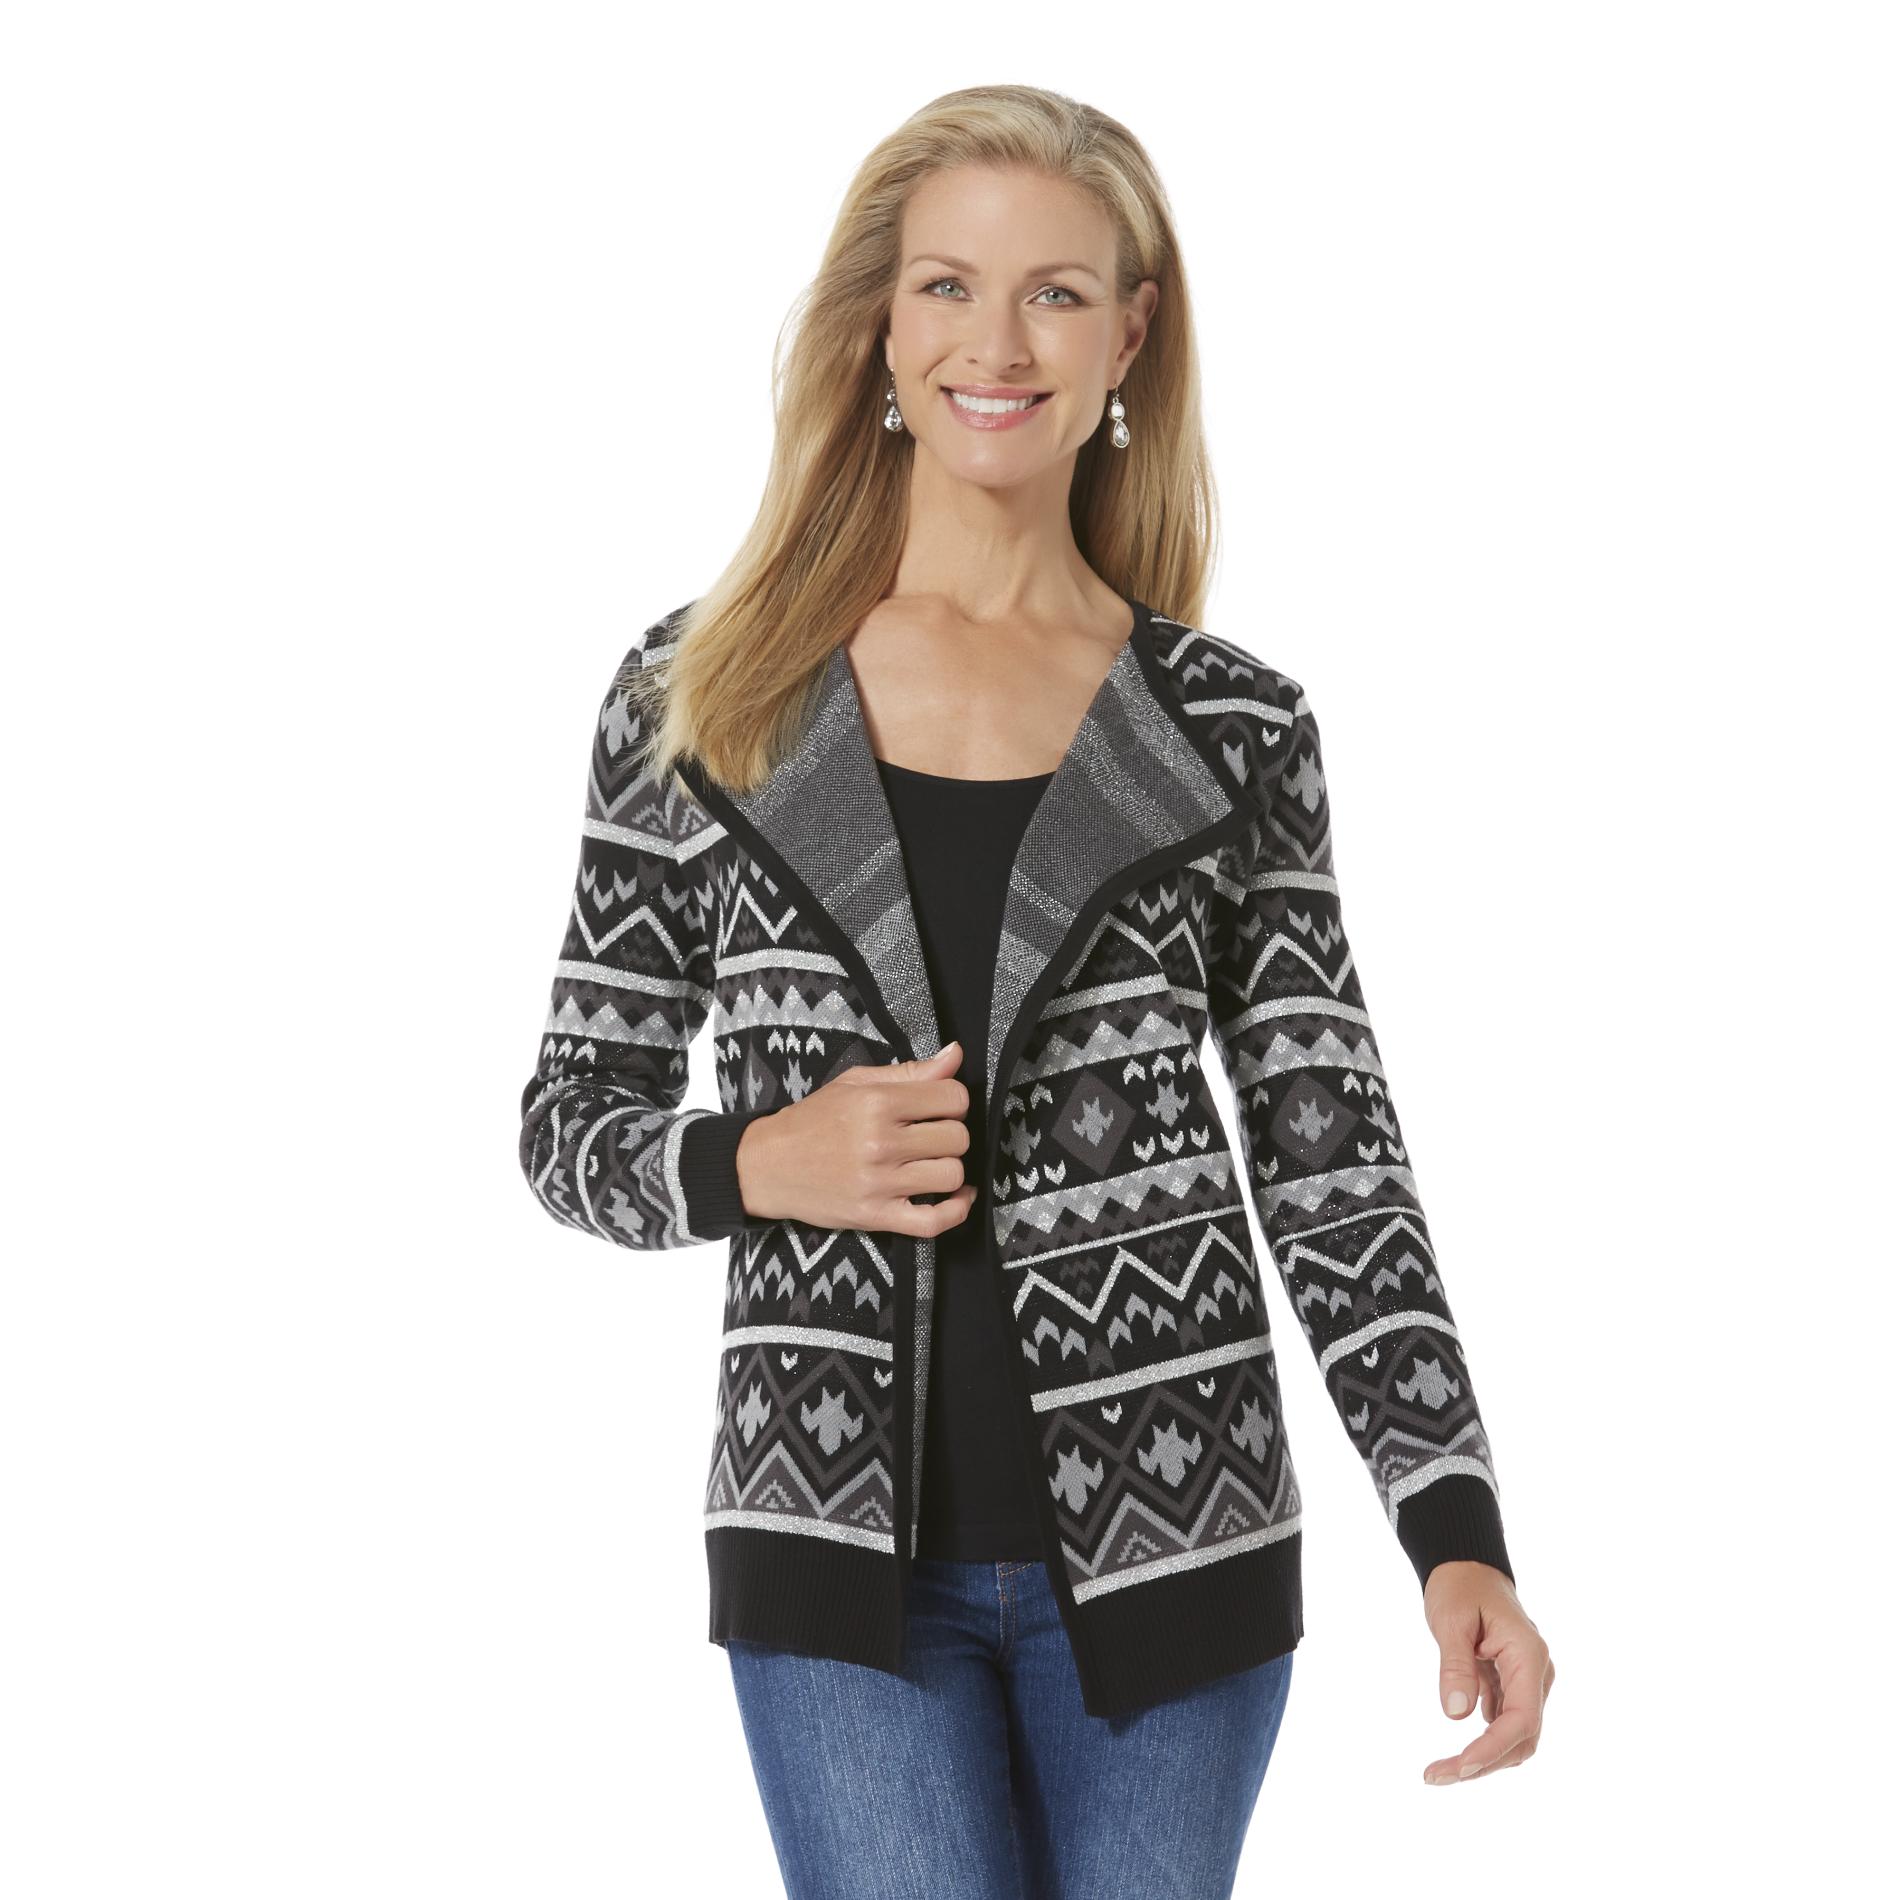 Basic Editions Women's Open-Front Cardigan Sweater - Tribal